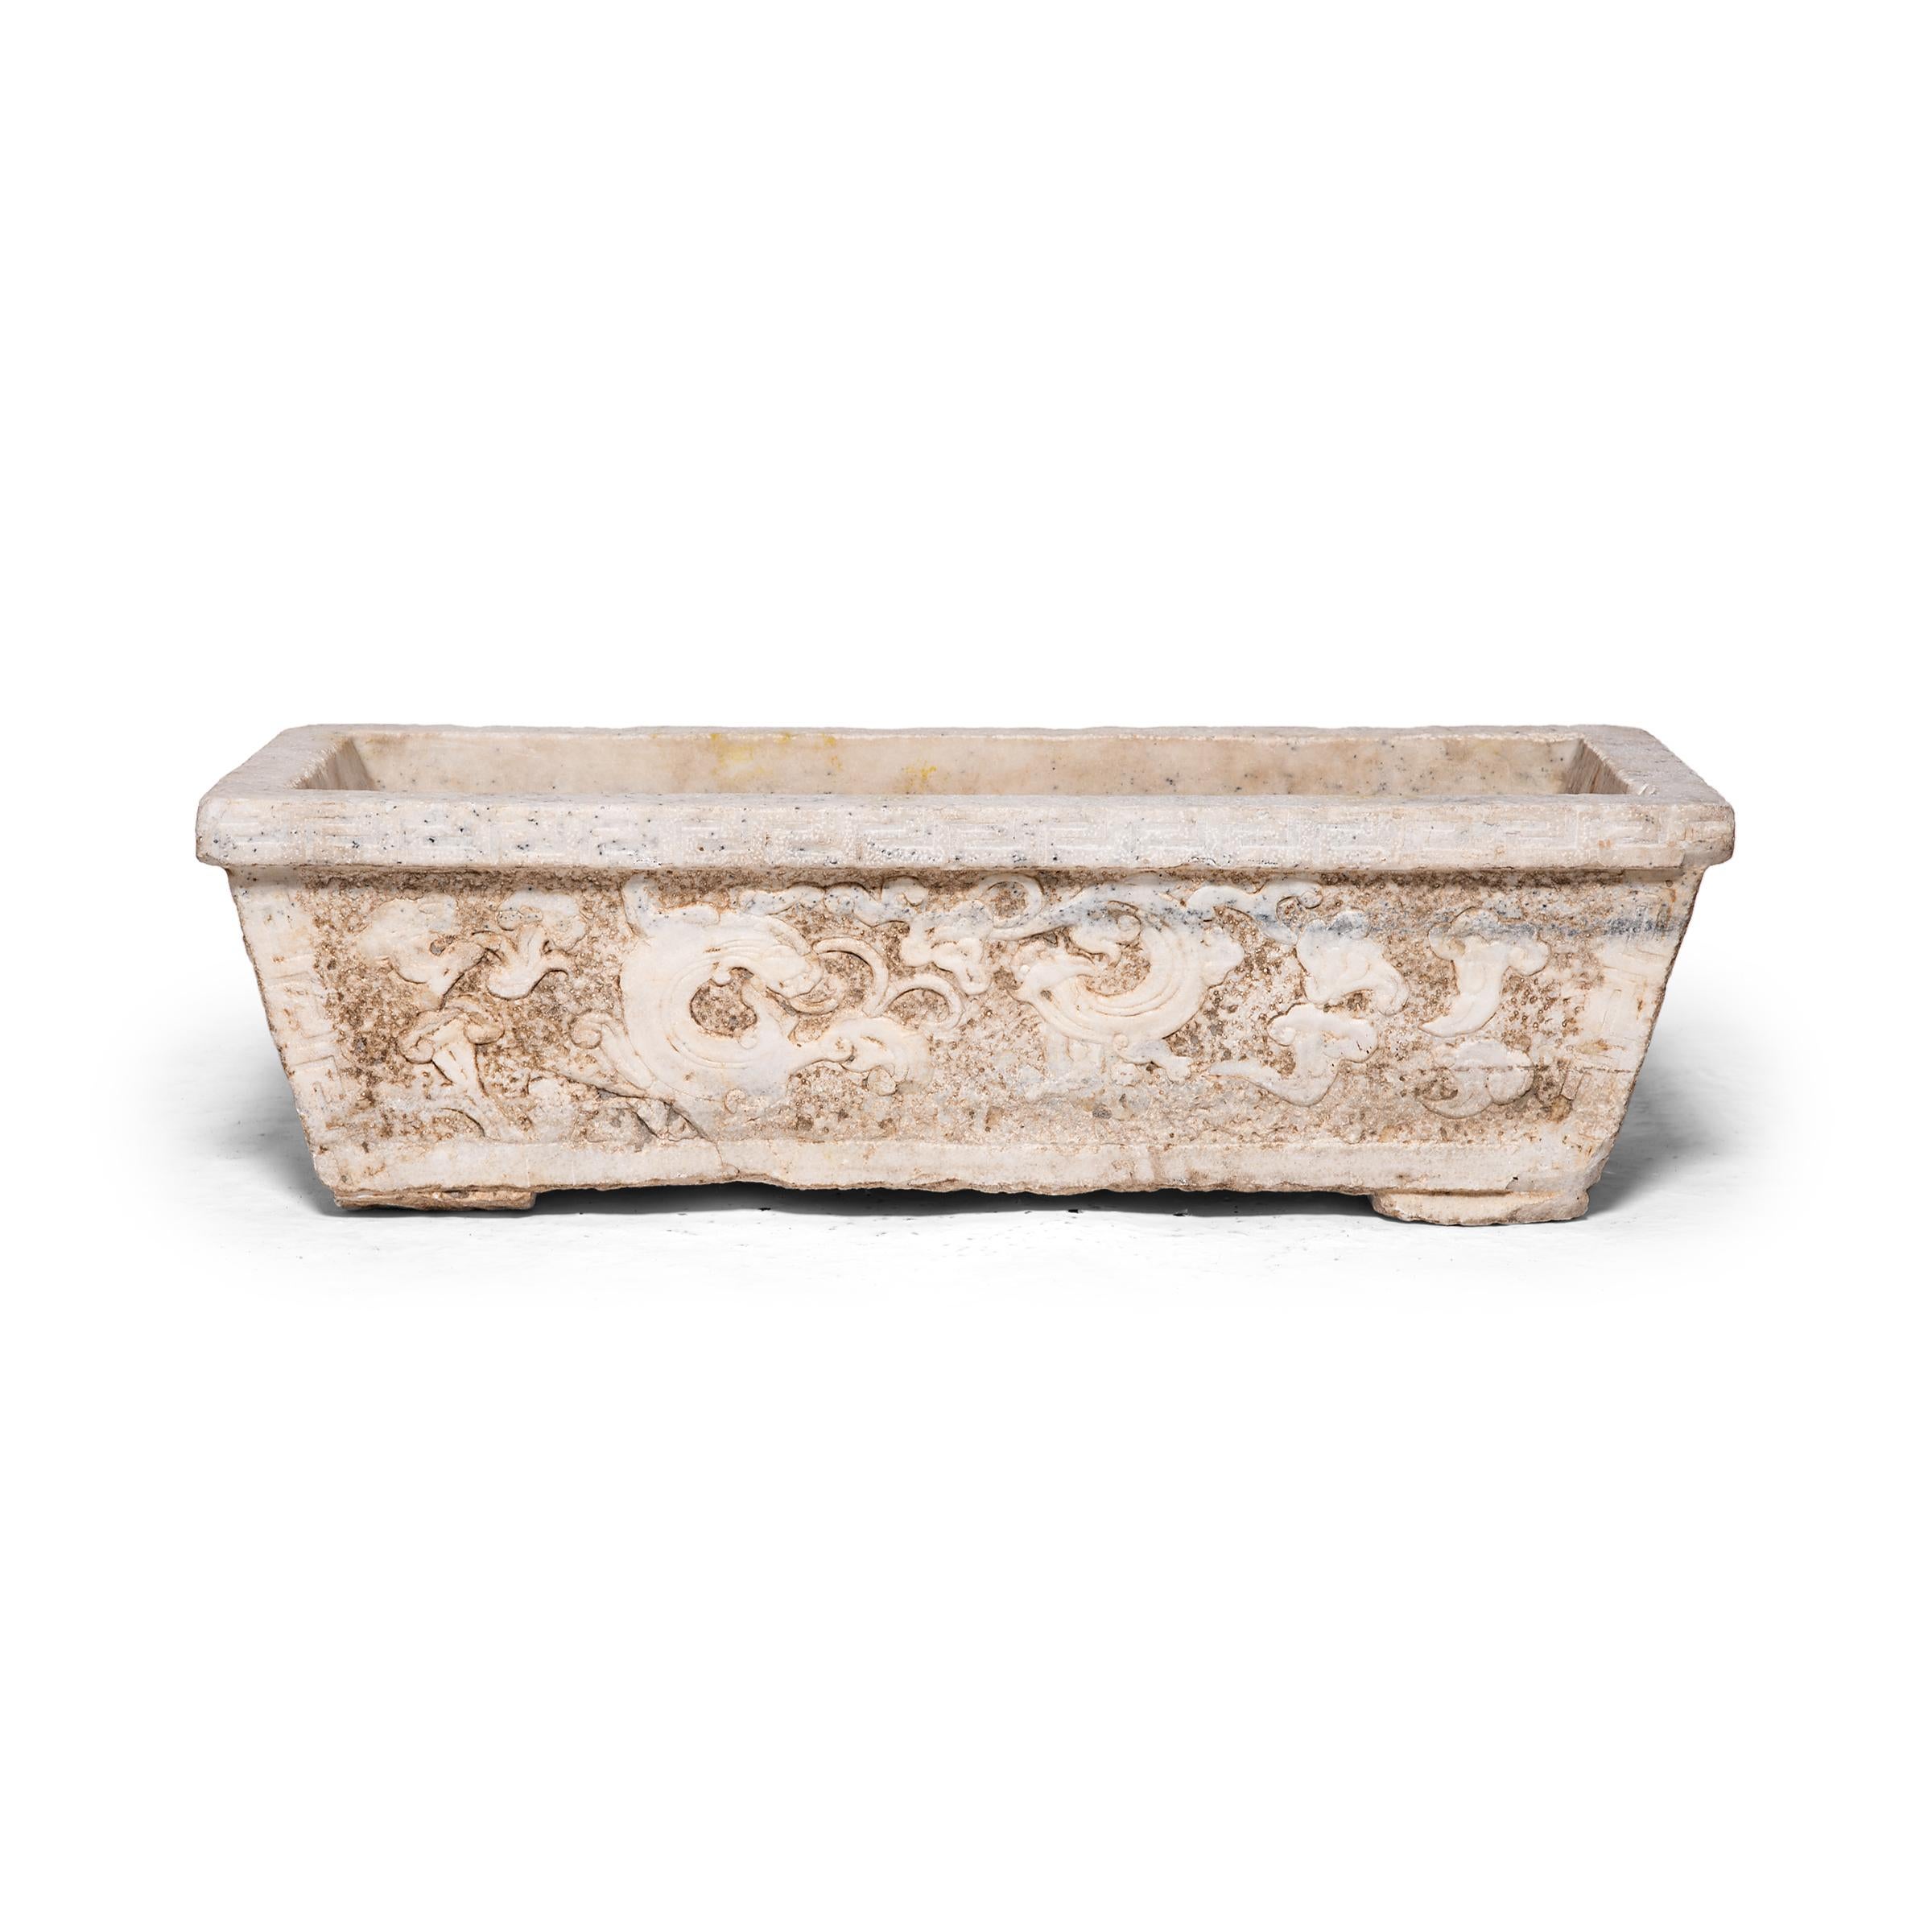 Hand-Carved 18th Century Chinese Shan Shui Marble Trough